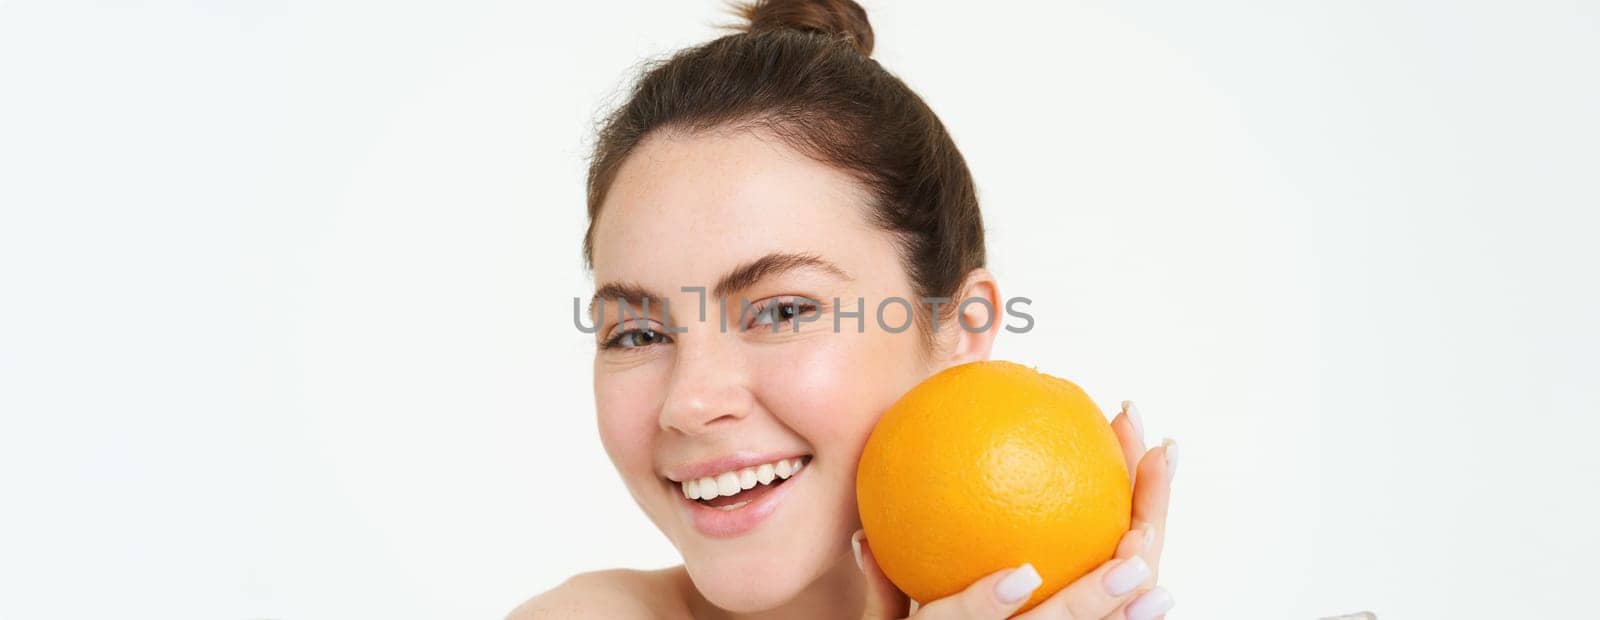 Vitamin C and health concept. Young beauty woman, holding orange fruit near face, concept of organic skincare treatment, facial and body products, standing over white background.